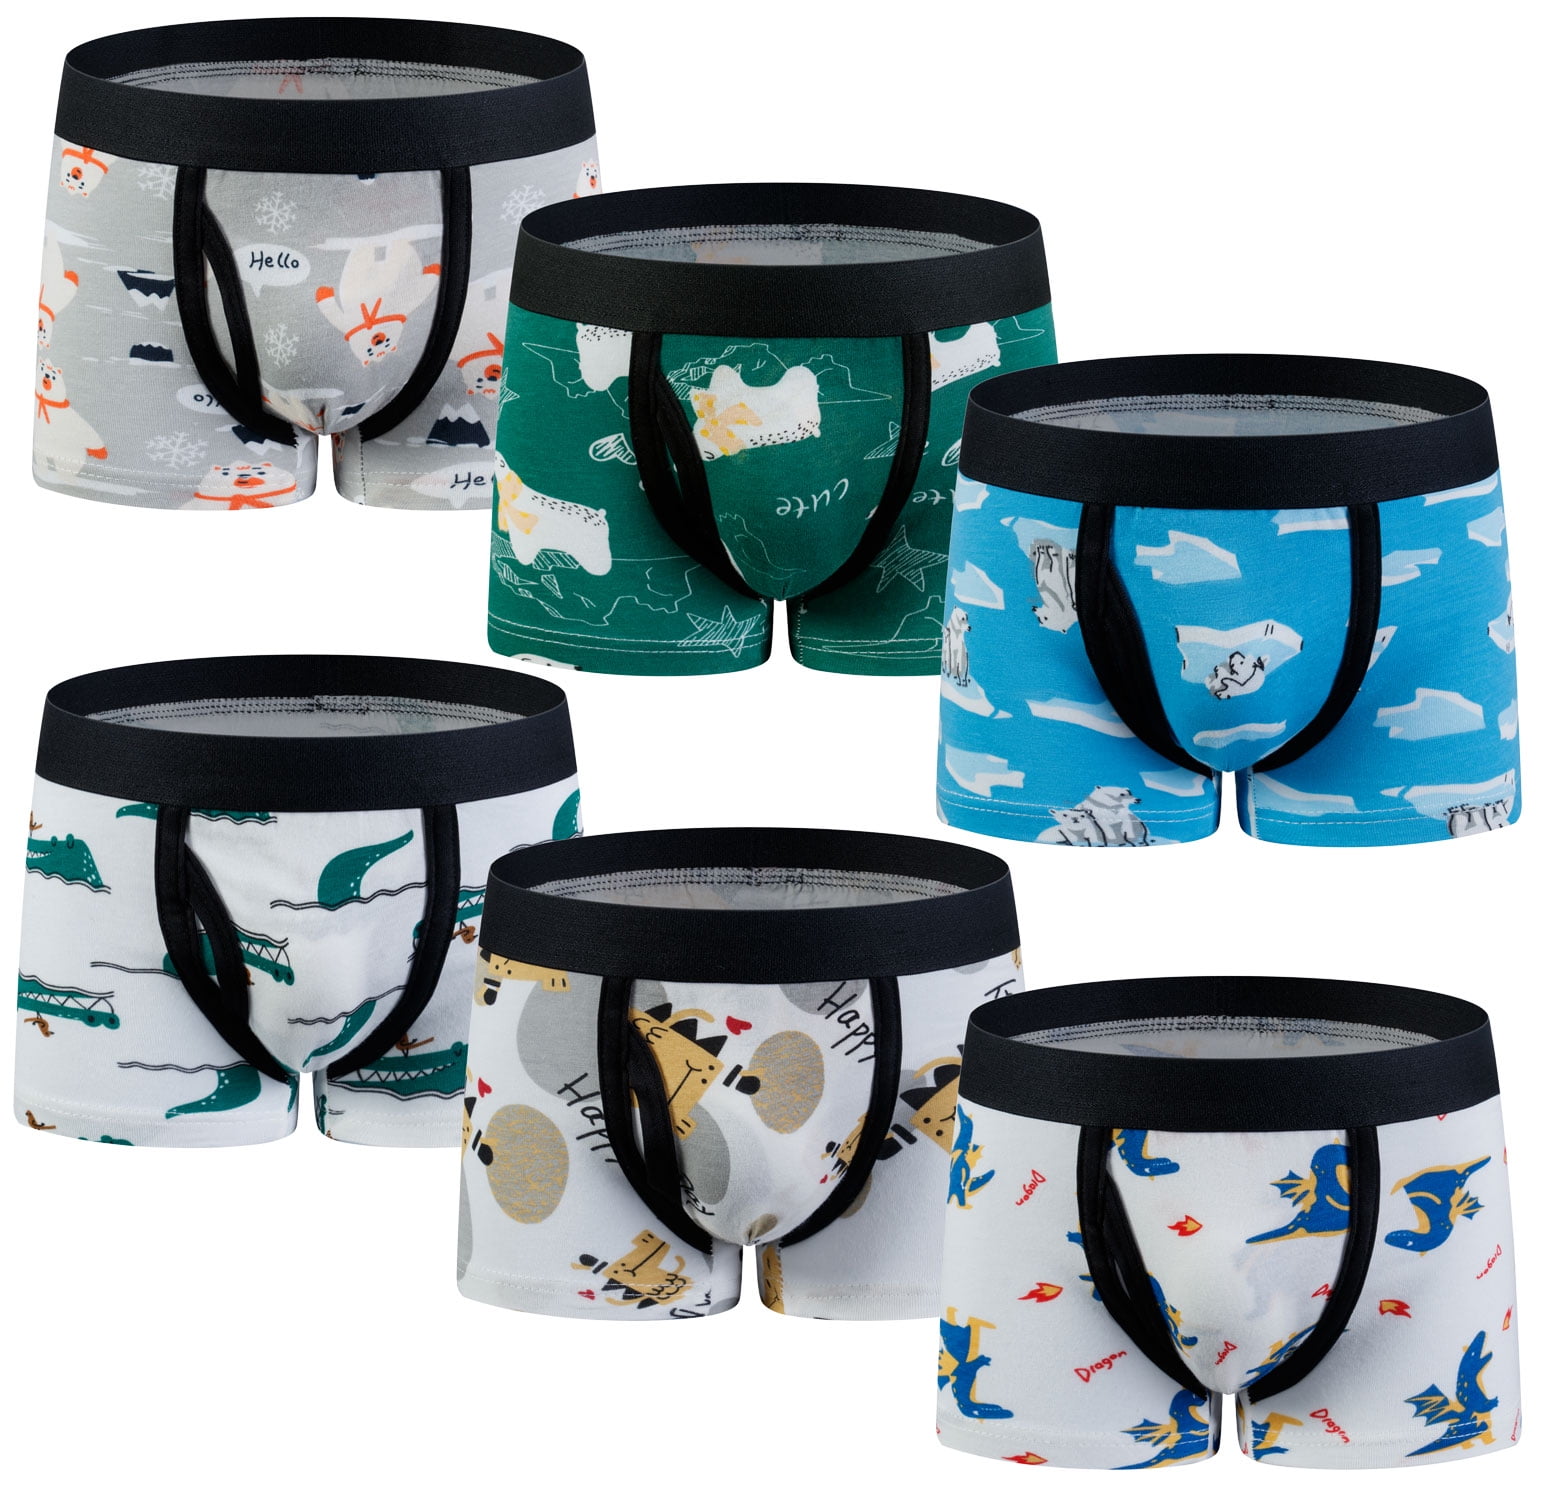 Hanes 6-Pack Potty Training Briefs, Toddler's Size 2T/3T, Multi NEW MSRP  $14